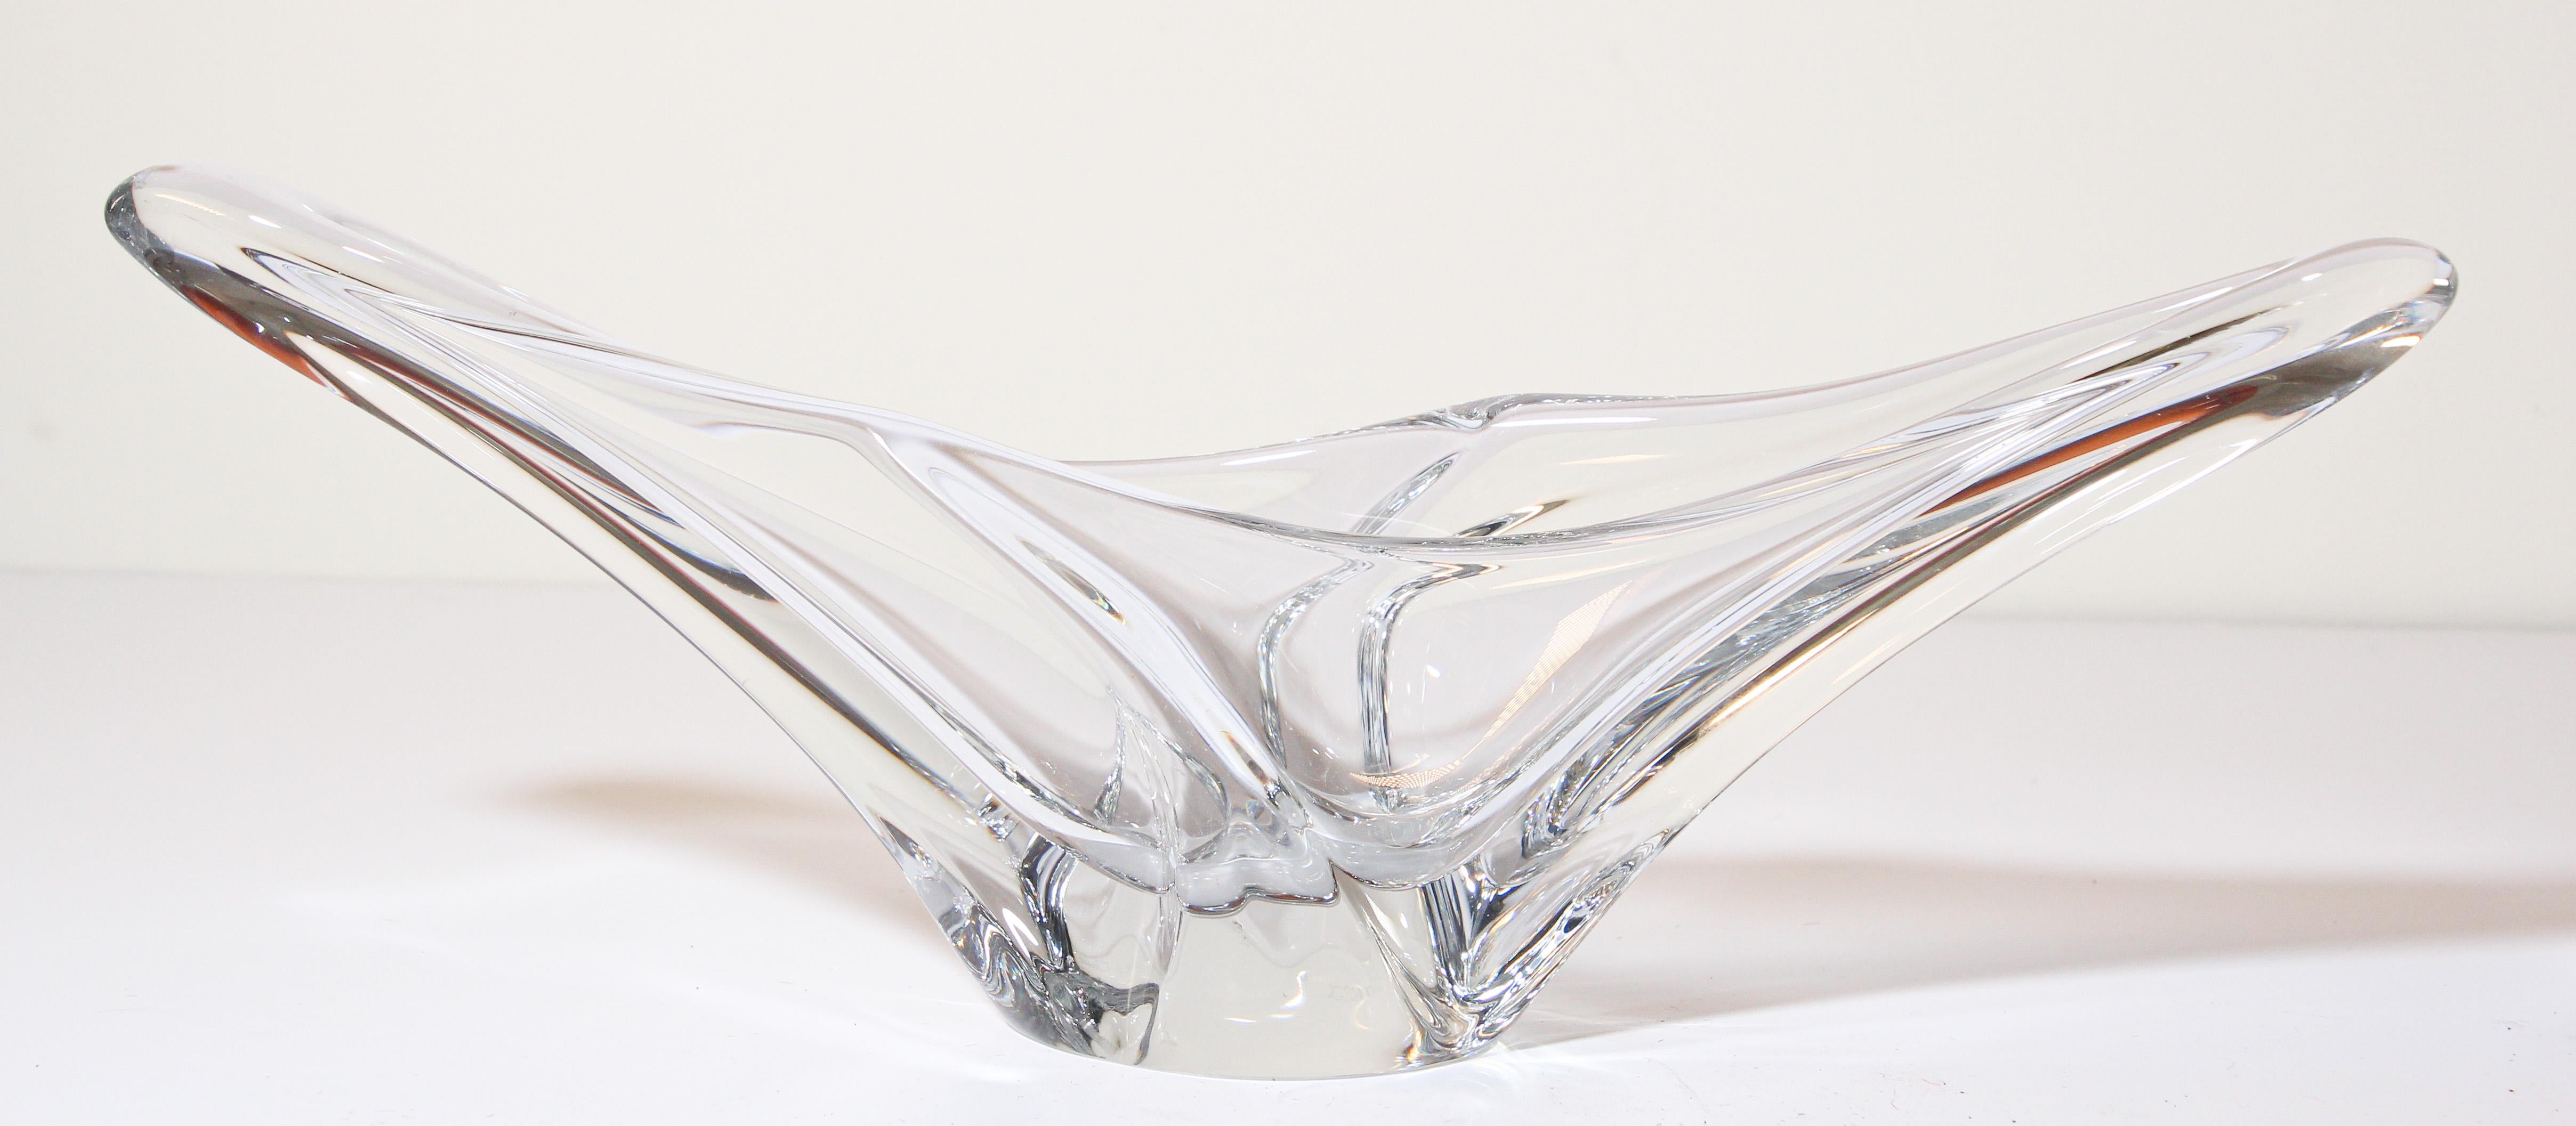 Hand-Crafted Sculptural Curvilinear Art Glass Fruit Bowl by Daum, France For Sale